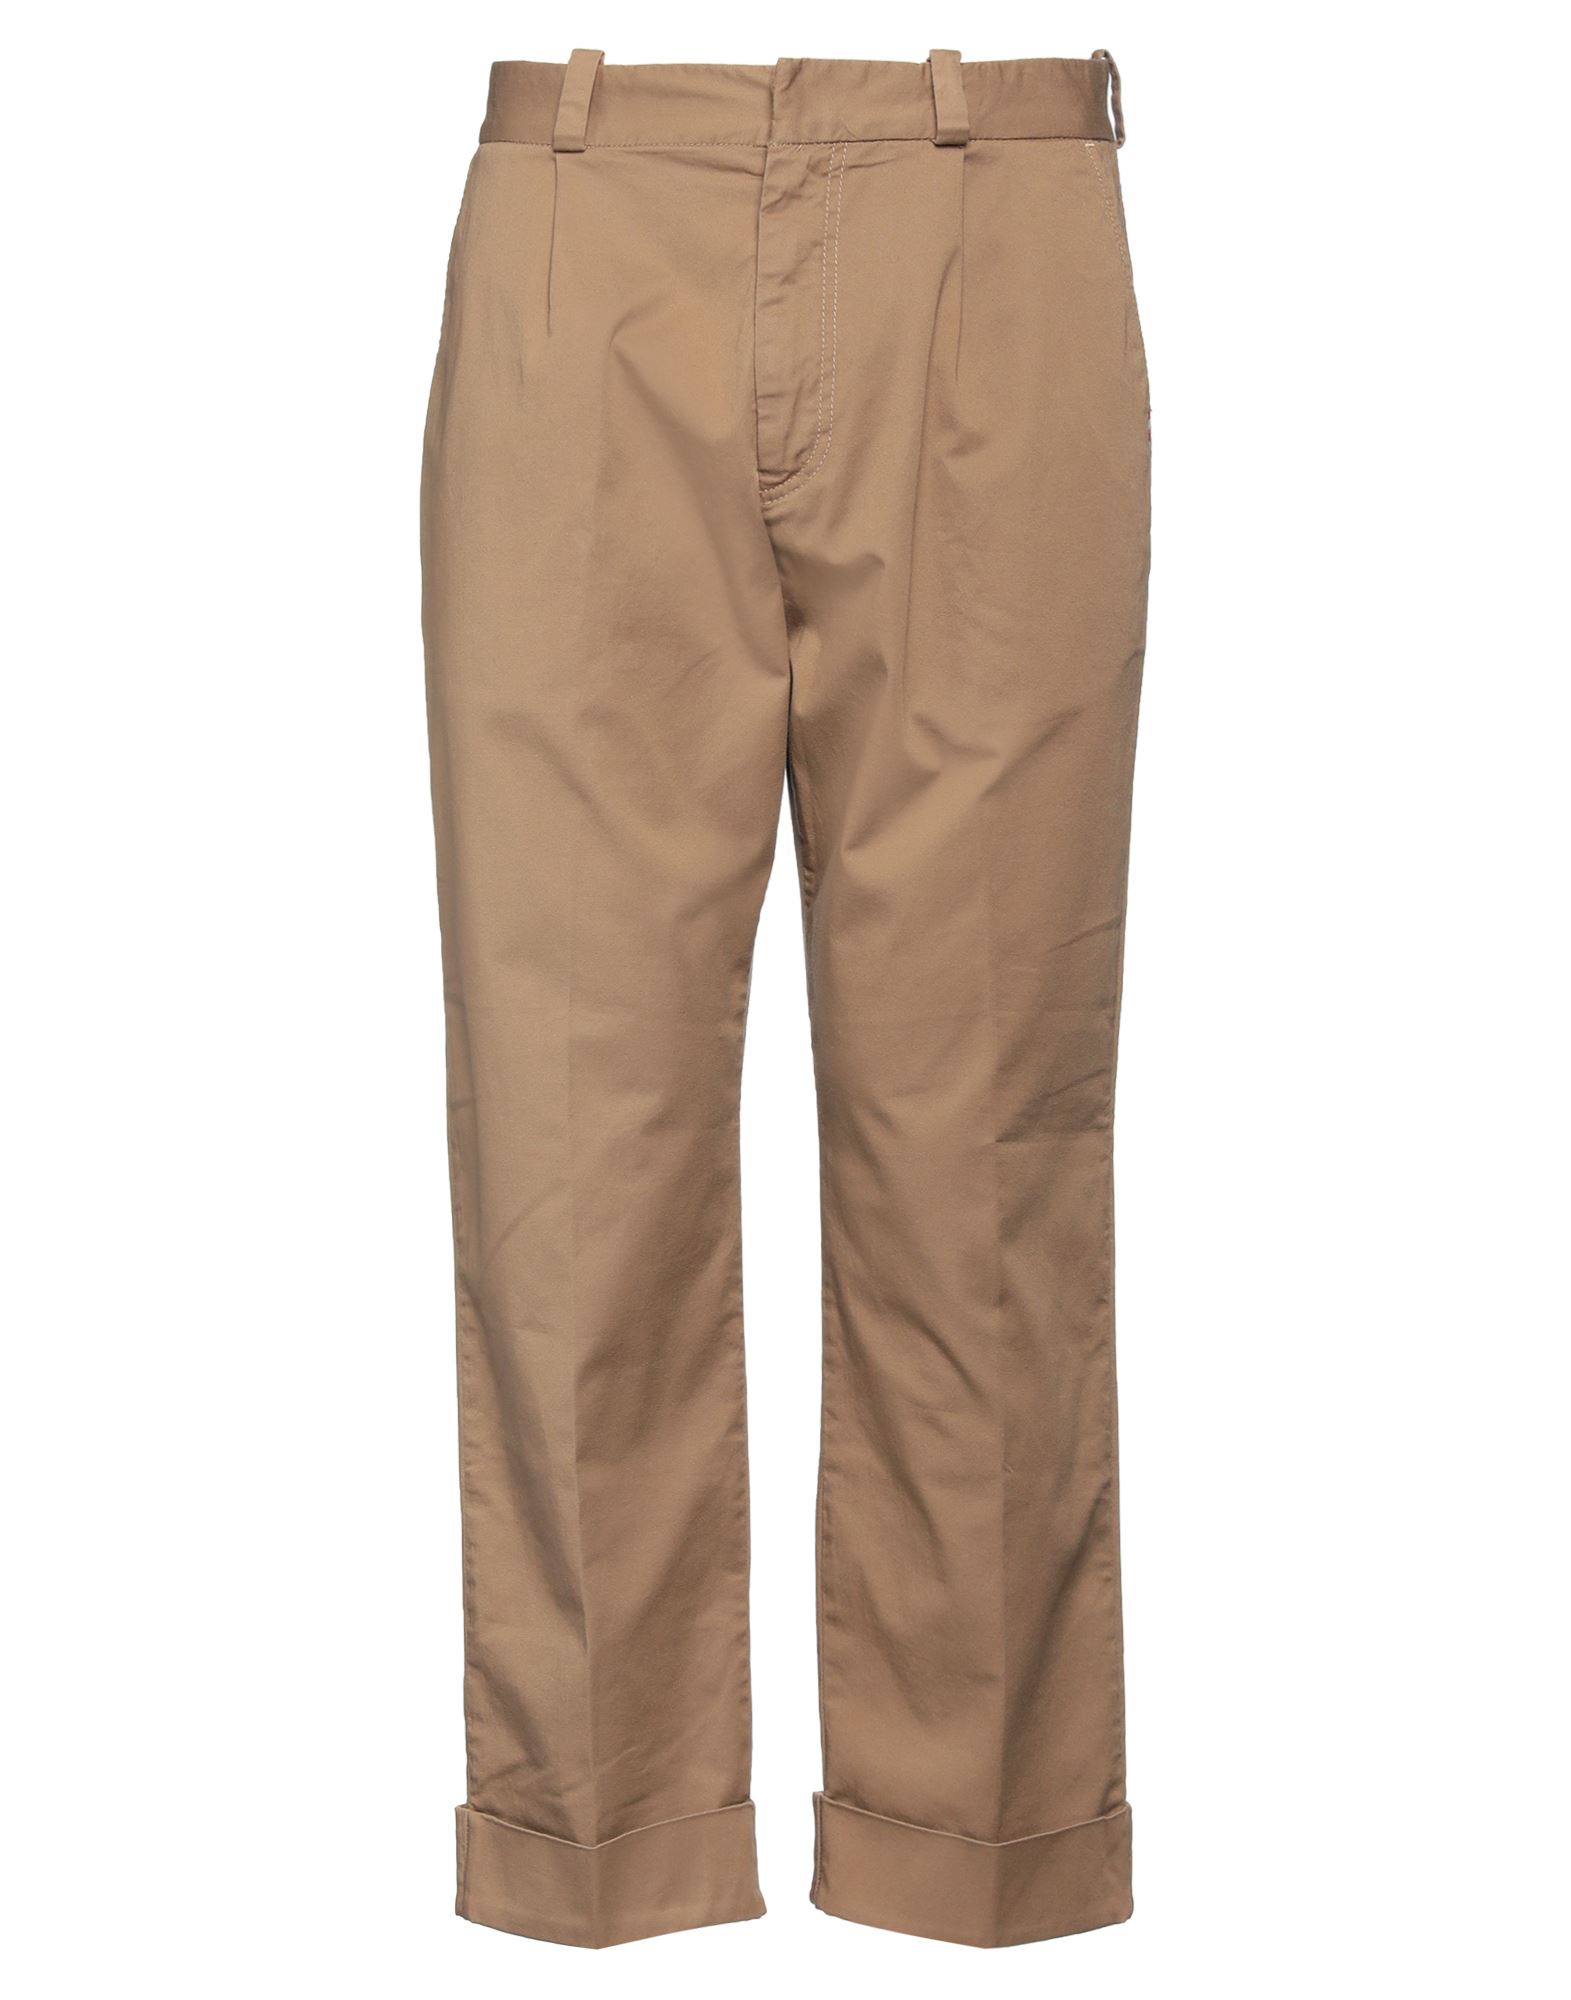 Amish Pants In Beige